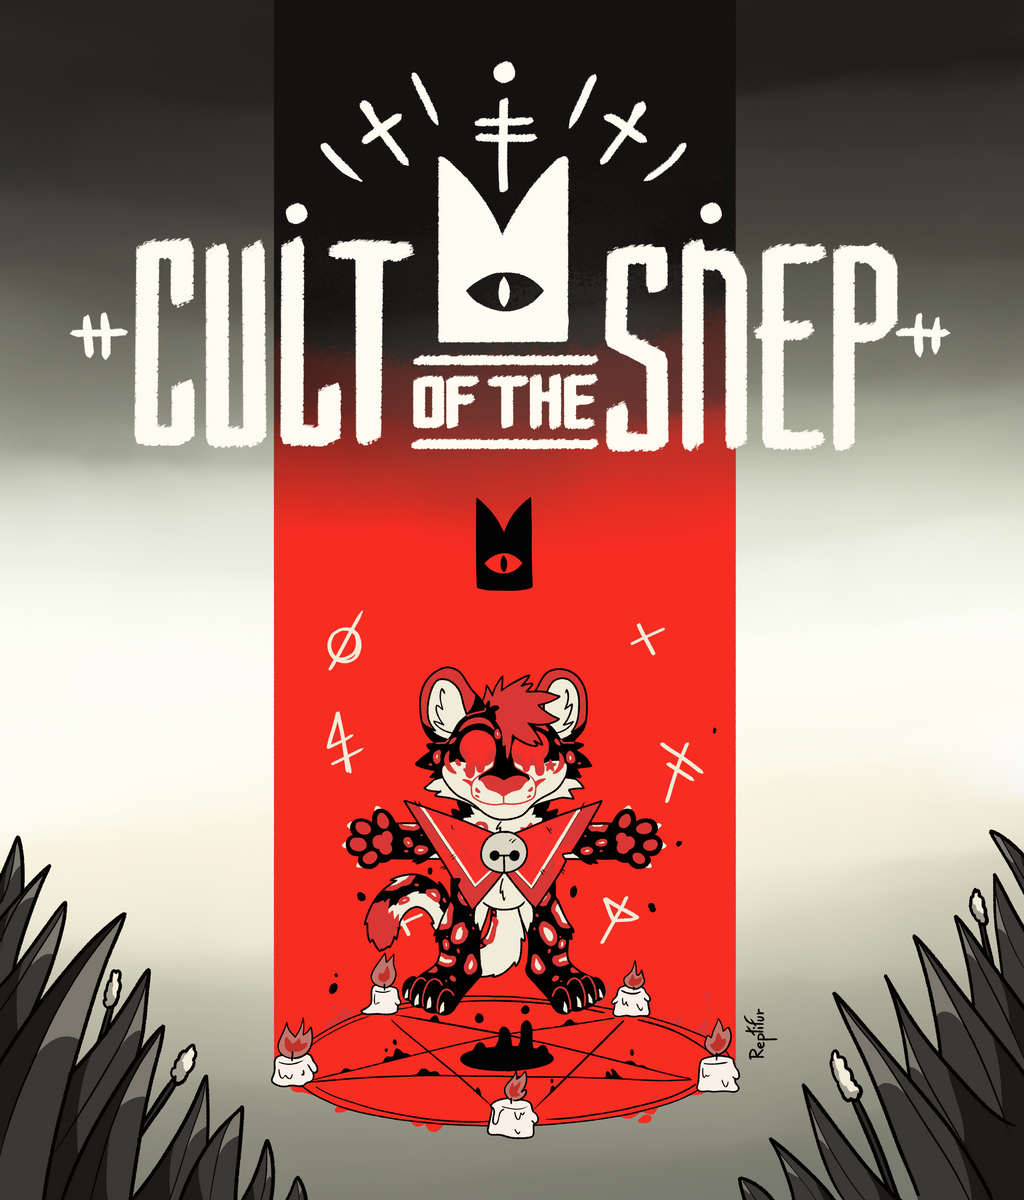 Cult of the snep (silou)